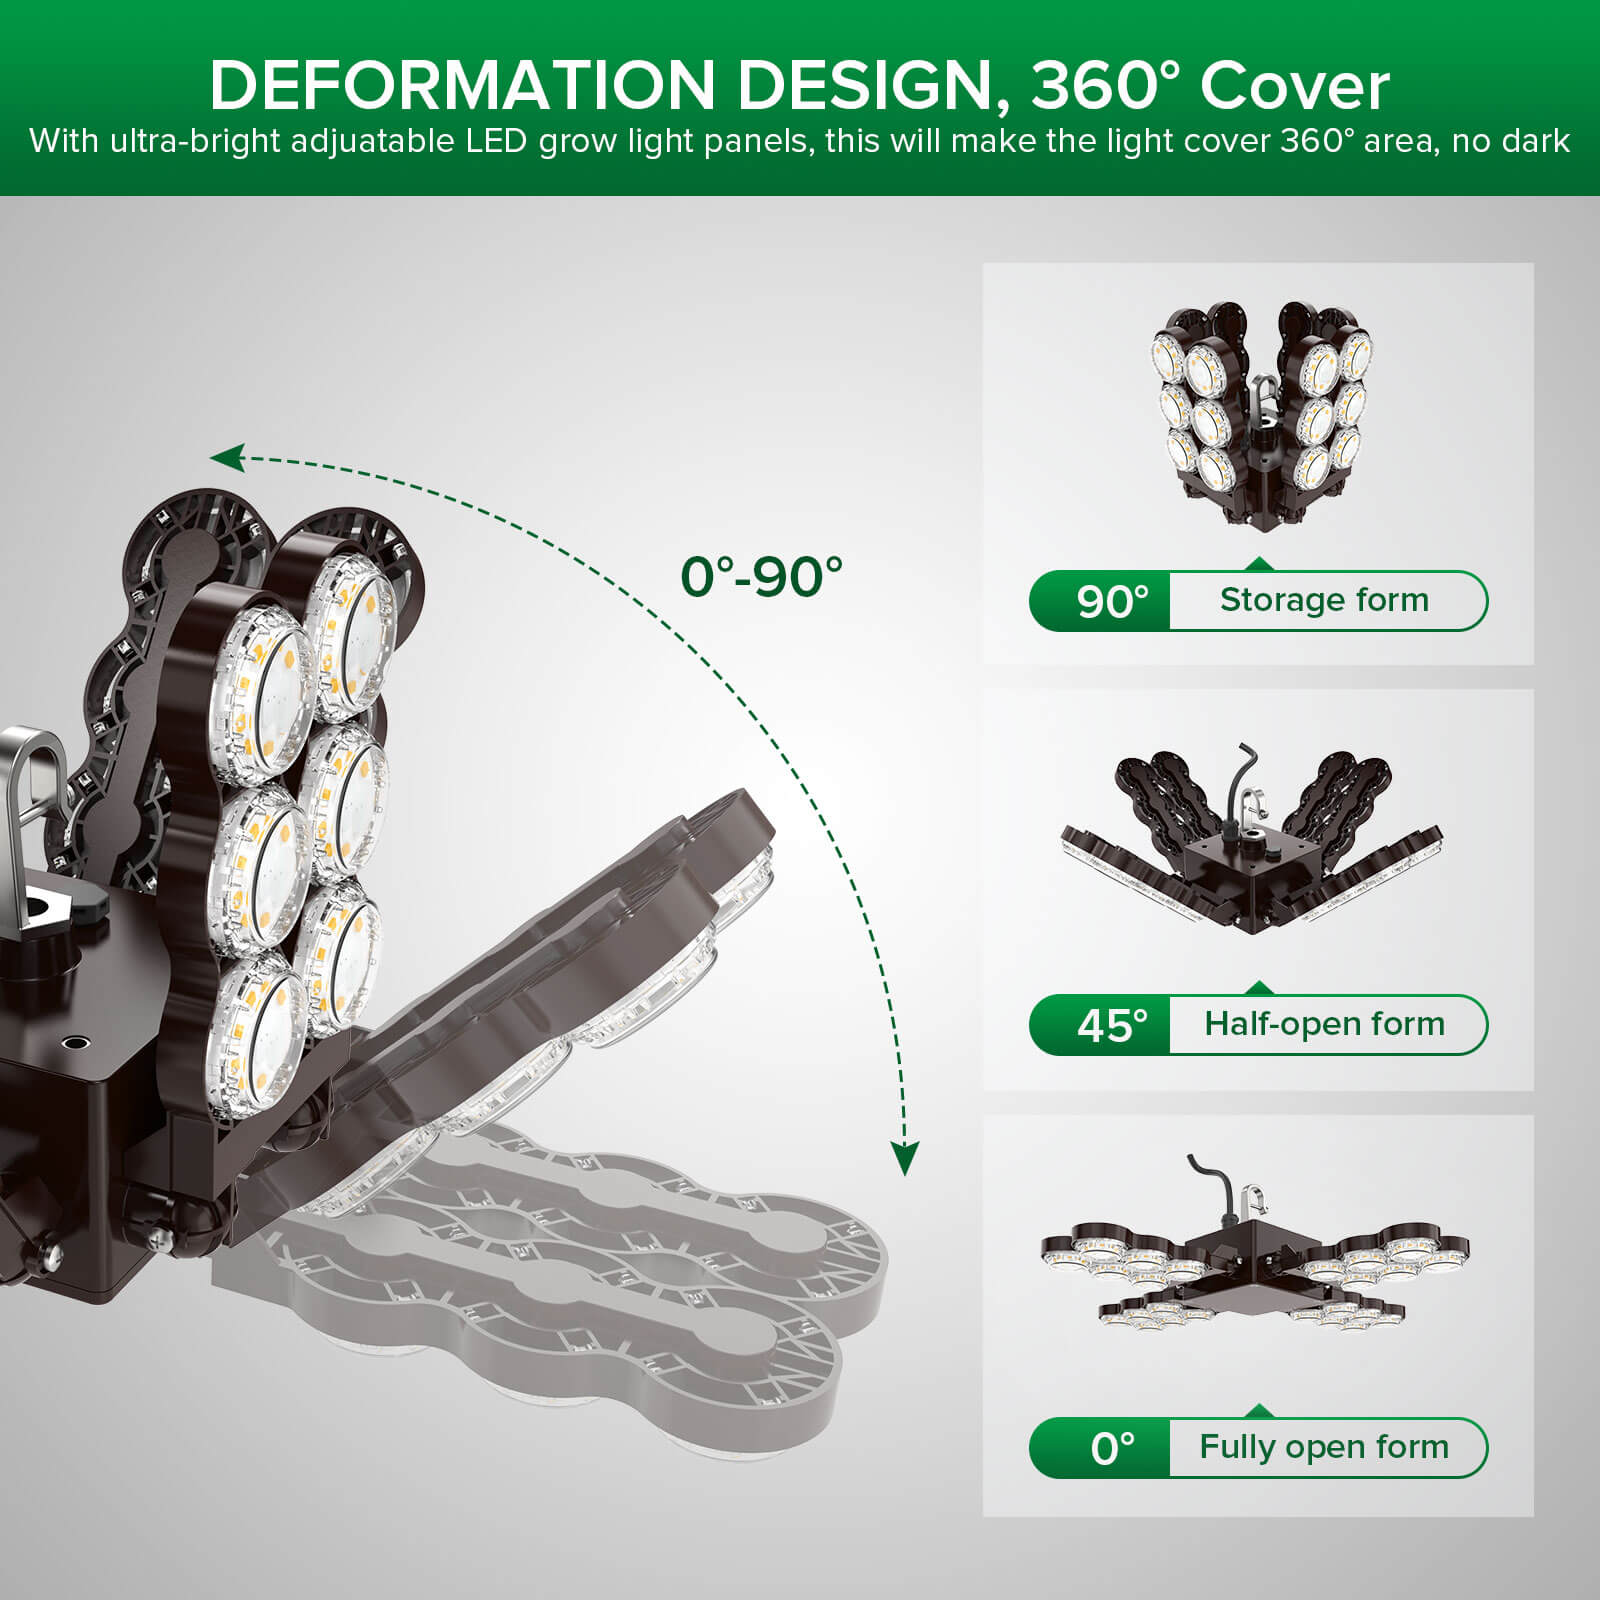 120W/220W Led Grow Light (Folding Wings) has deformation design, 360° Cover